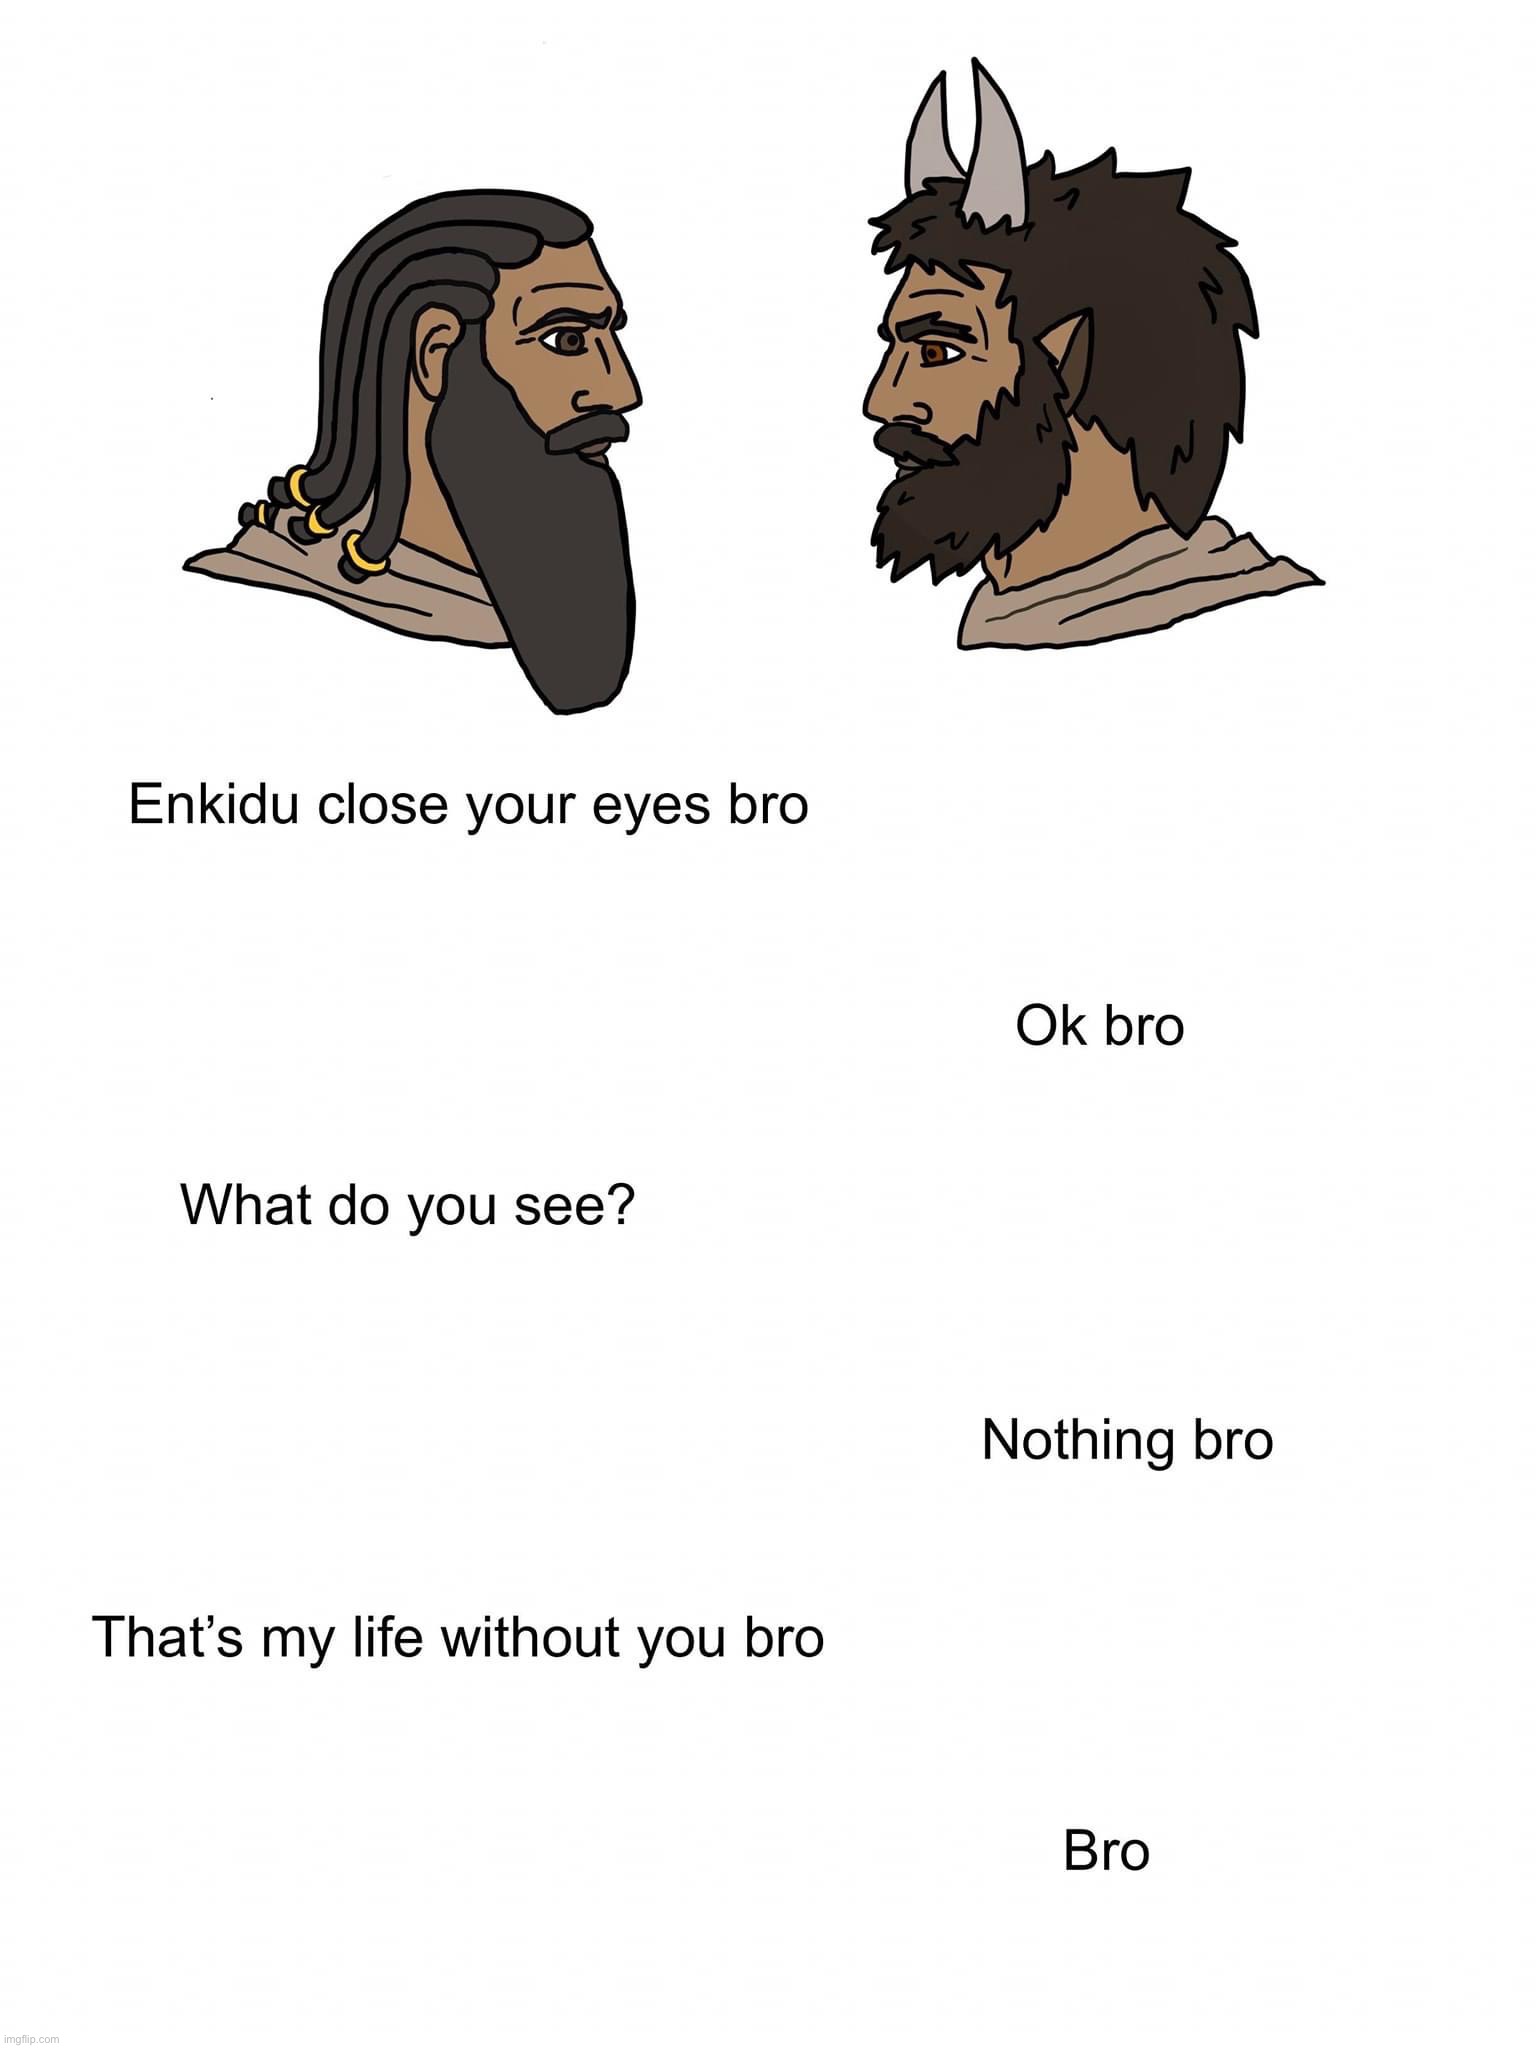 Gilgamesh & Enkidu: First Epic, First Gay Couple in Literature | image tagged in gilgamesh and enkidu,gay,epic,literature,ancient,mesopotamia | made w/ Imgflip meme maker